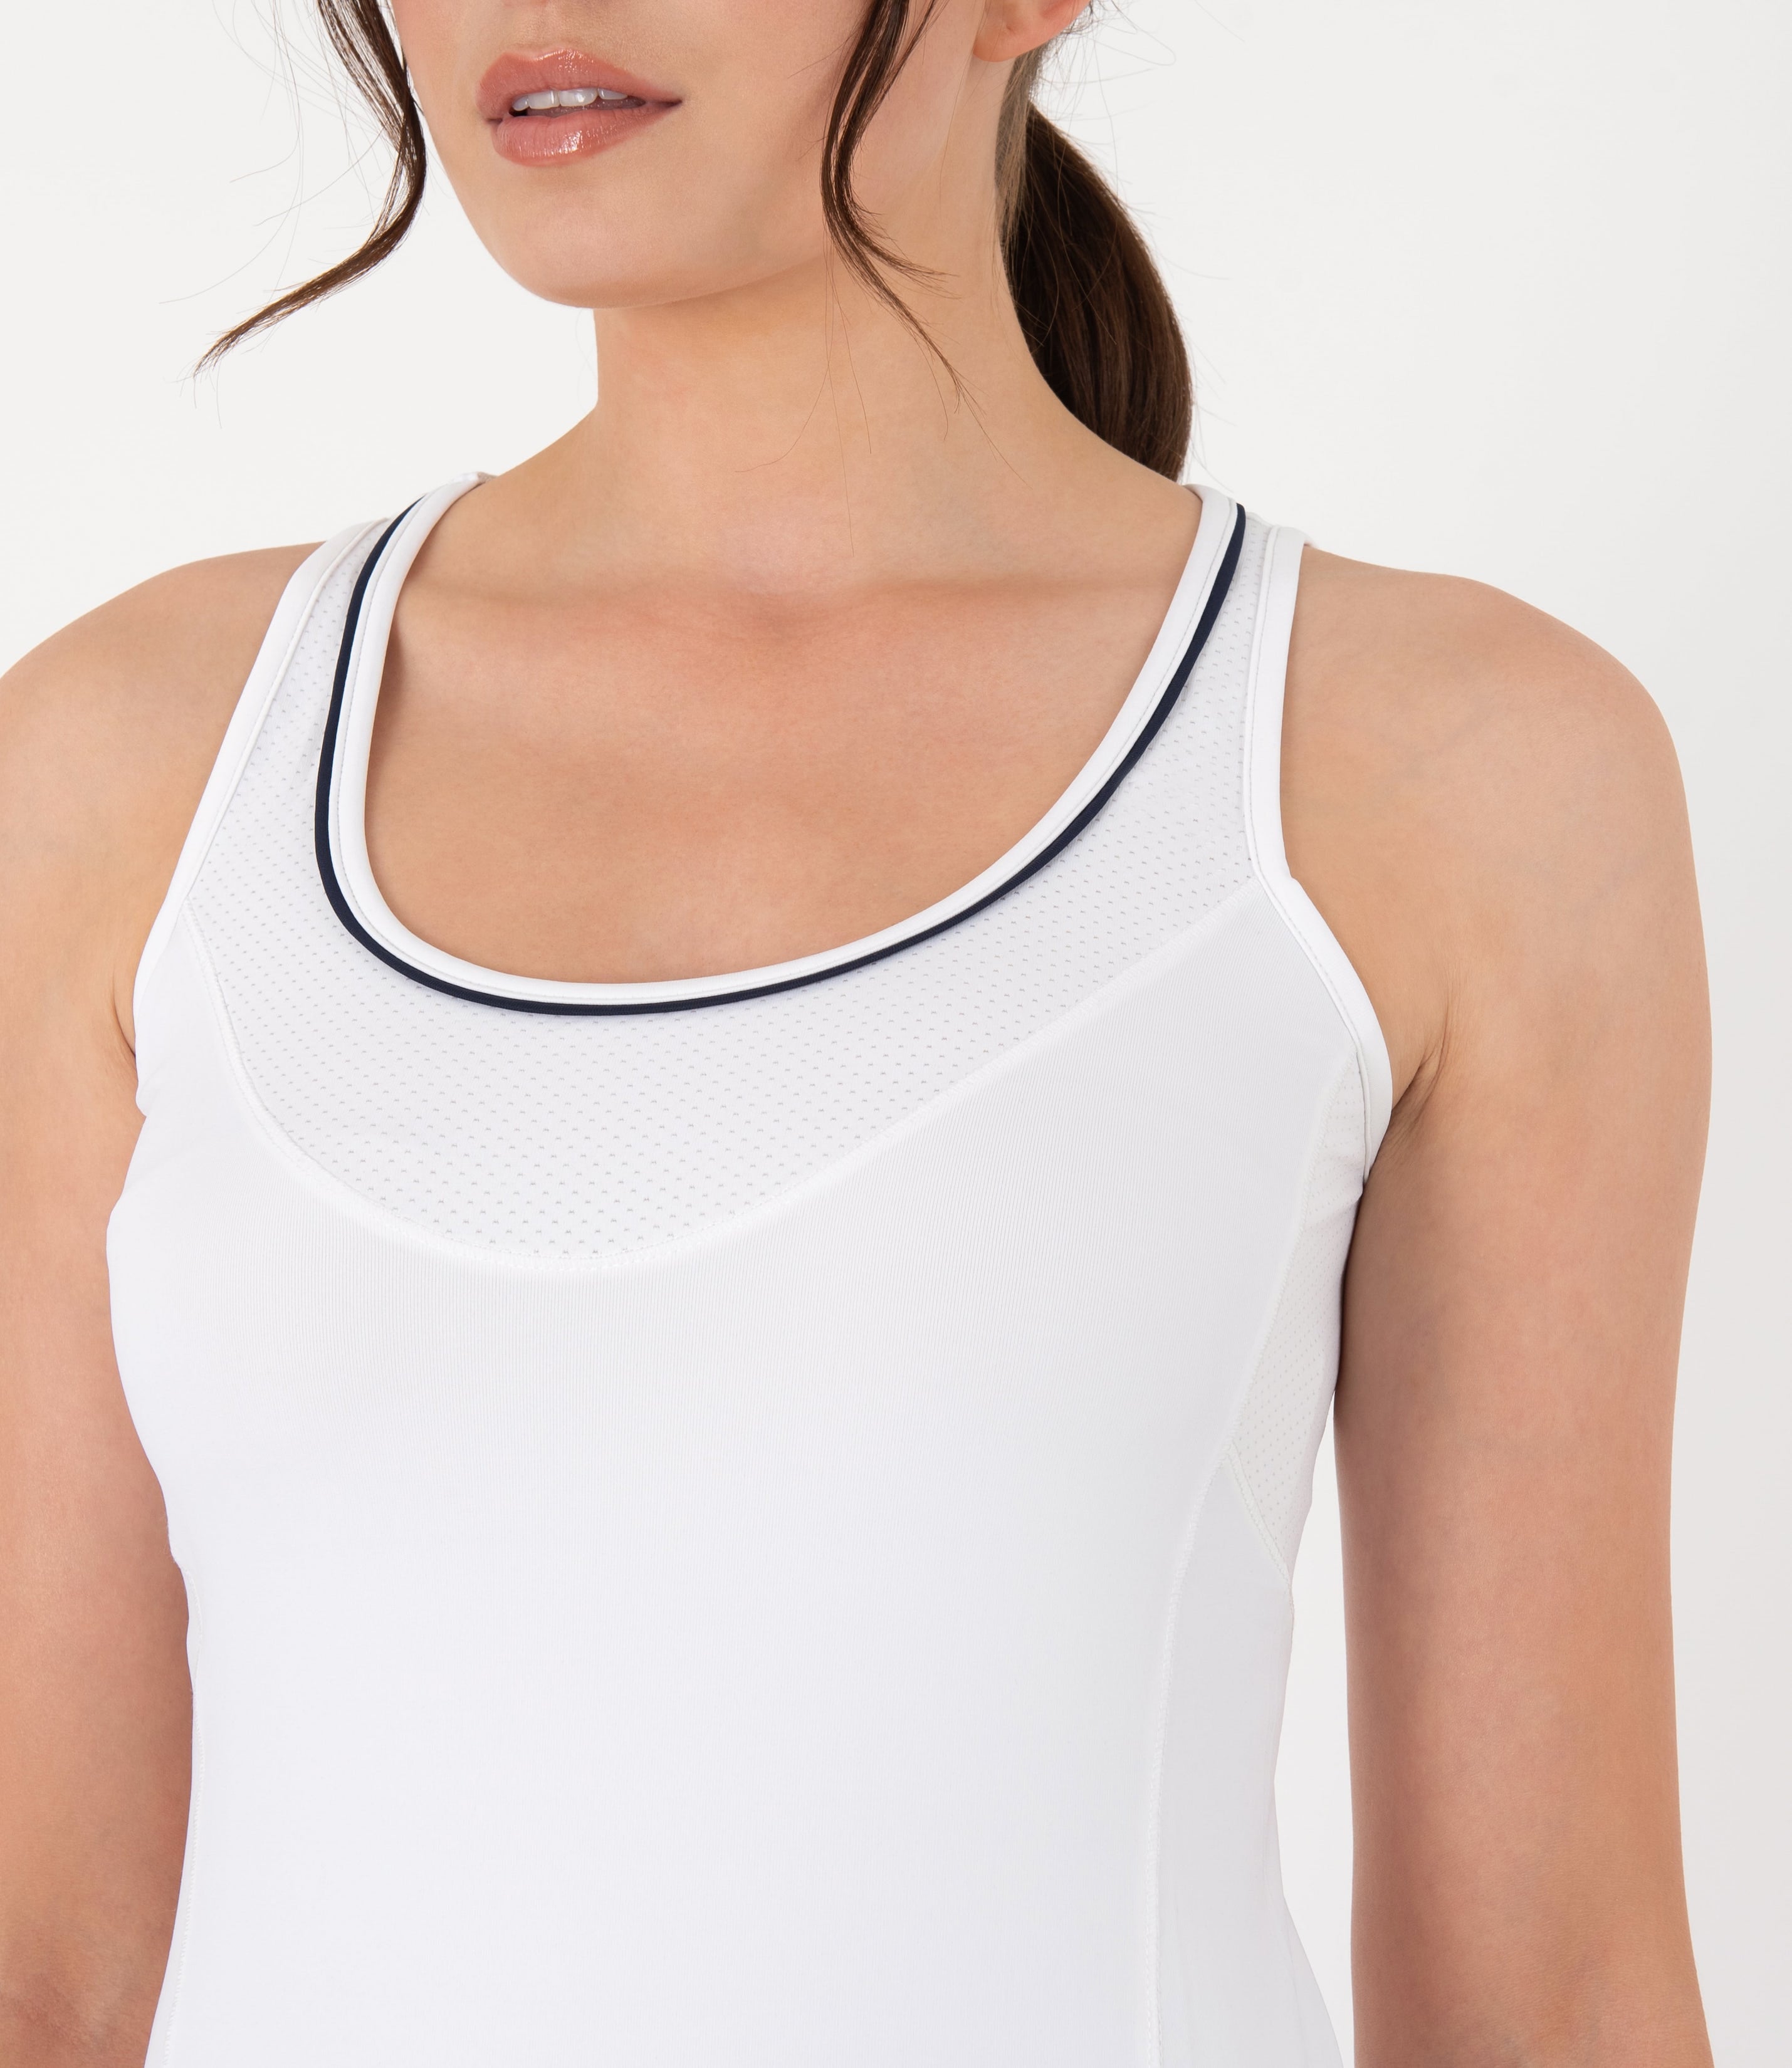 Anne Technical Workout Tank - White and Navy | PlayBrave Sportswear